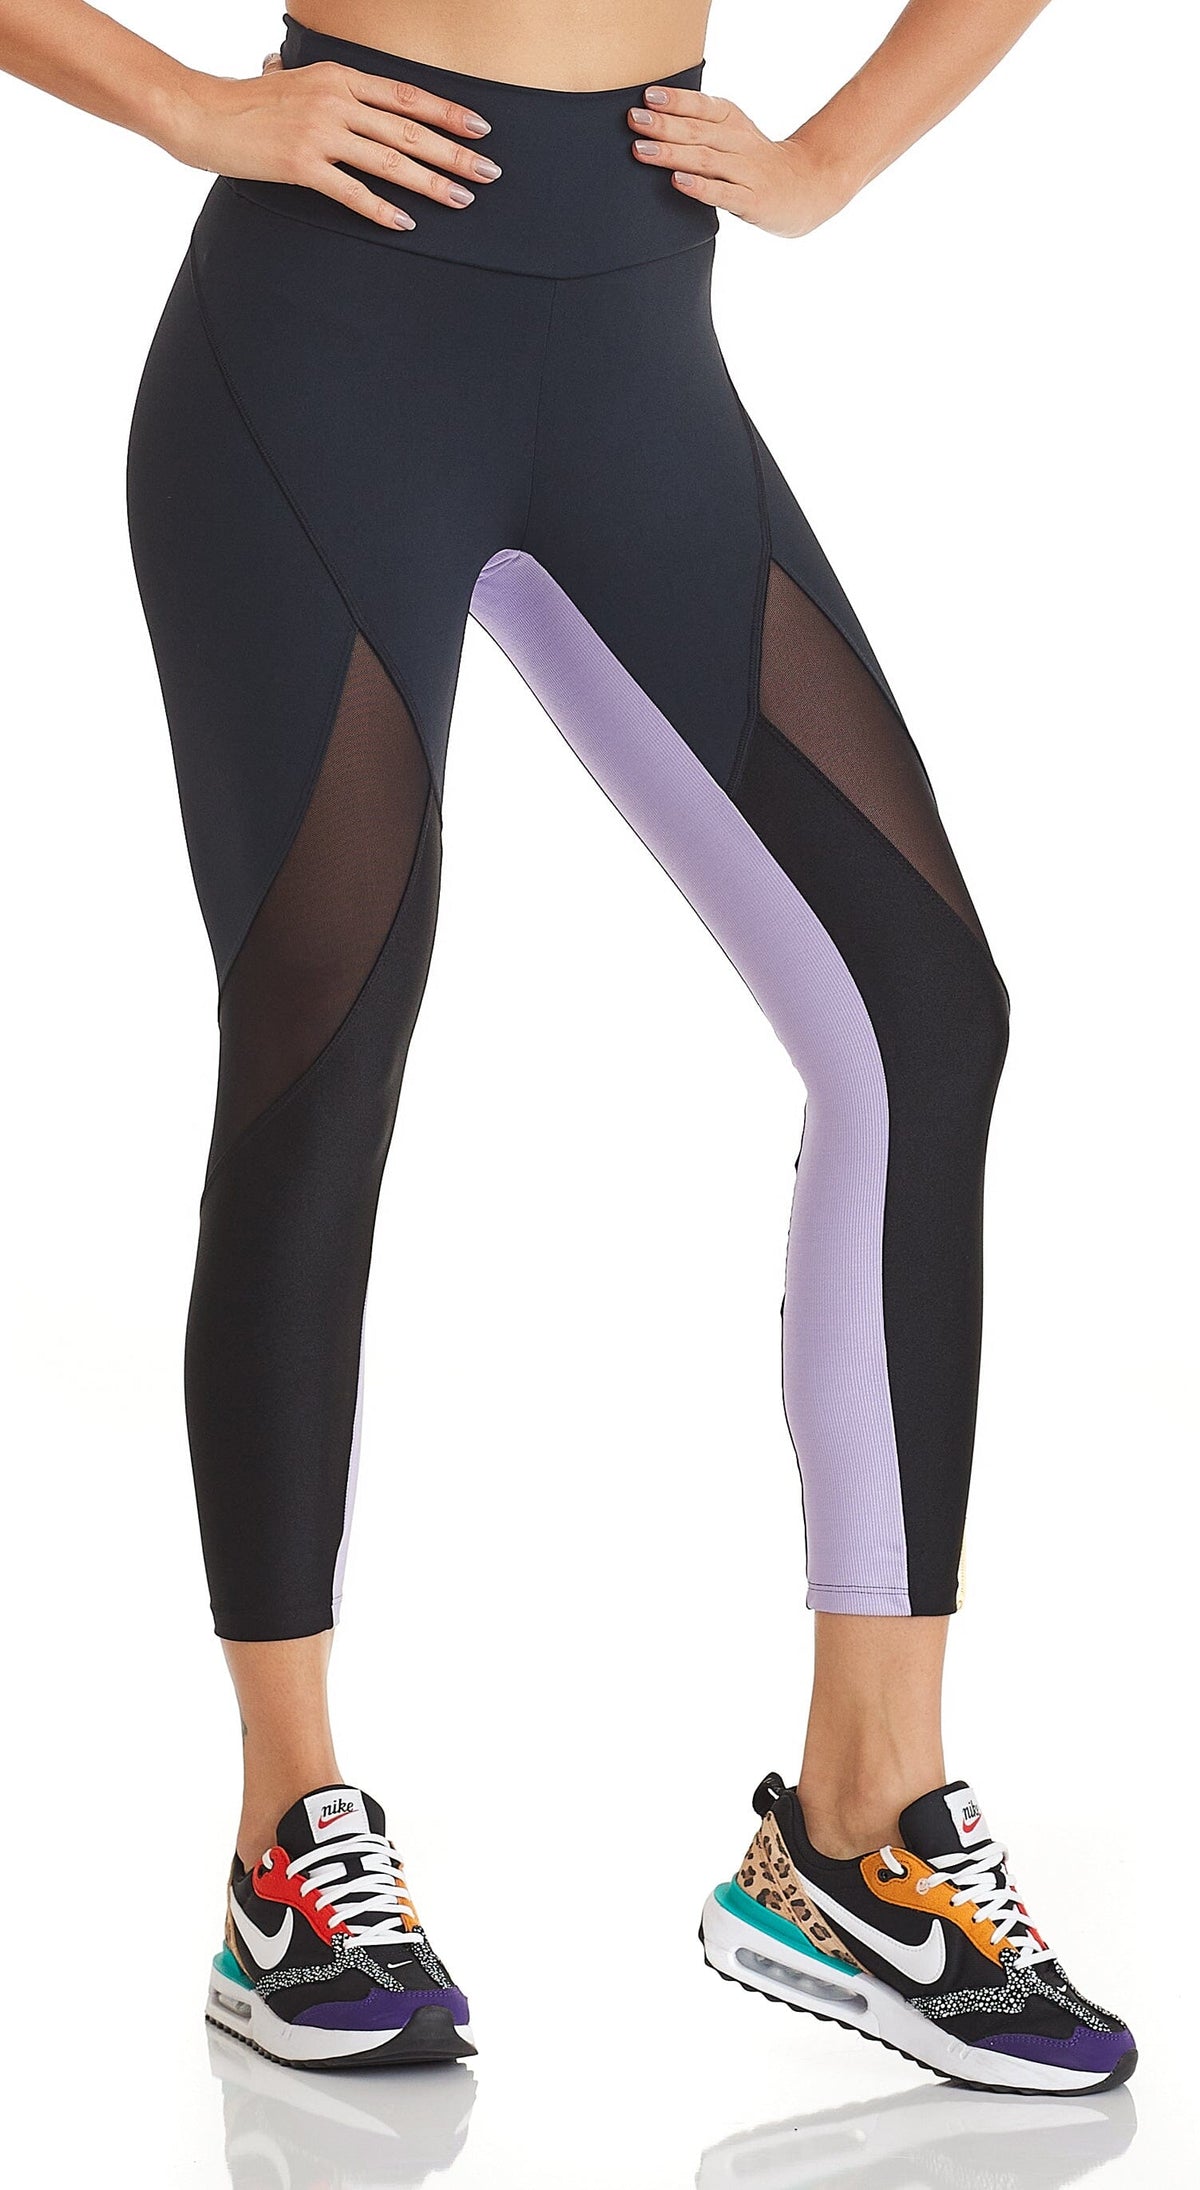 Activewear With Compression Brazilian Workout Gear Top Rio, 51% OFF